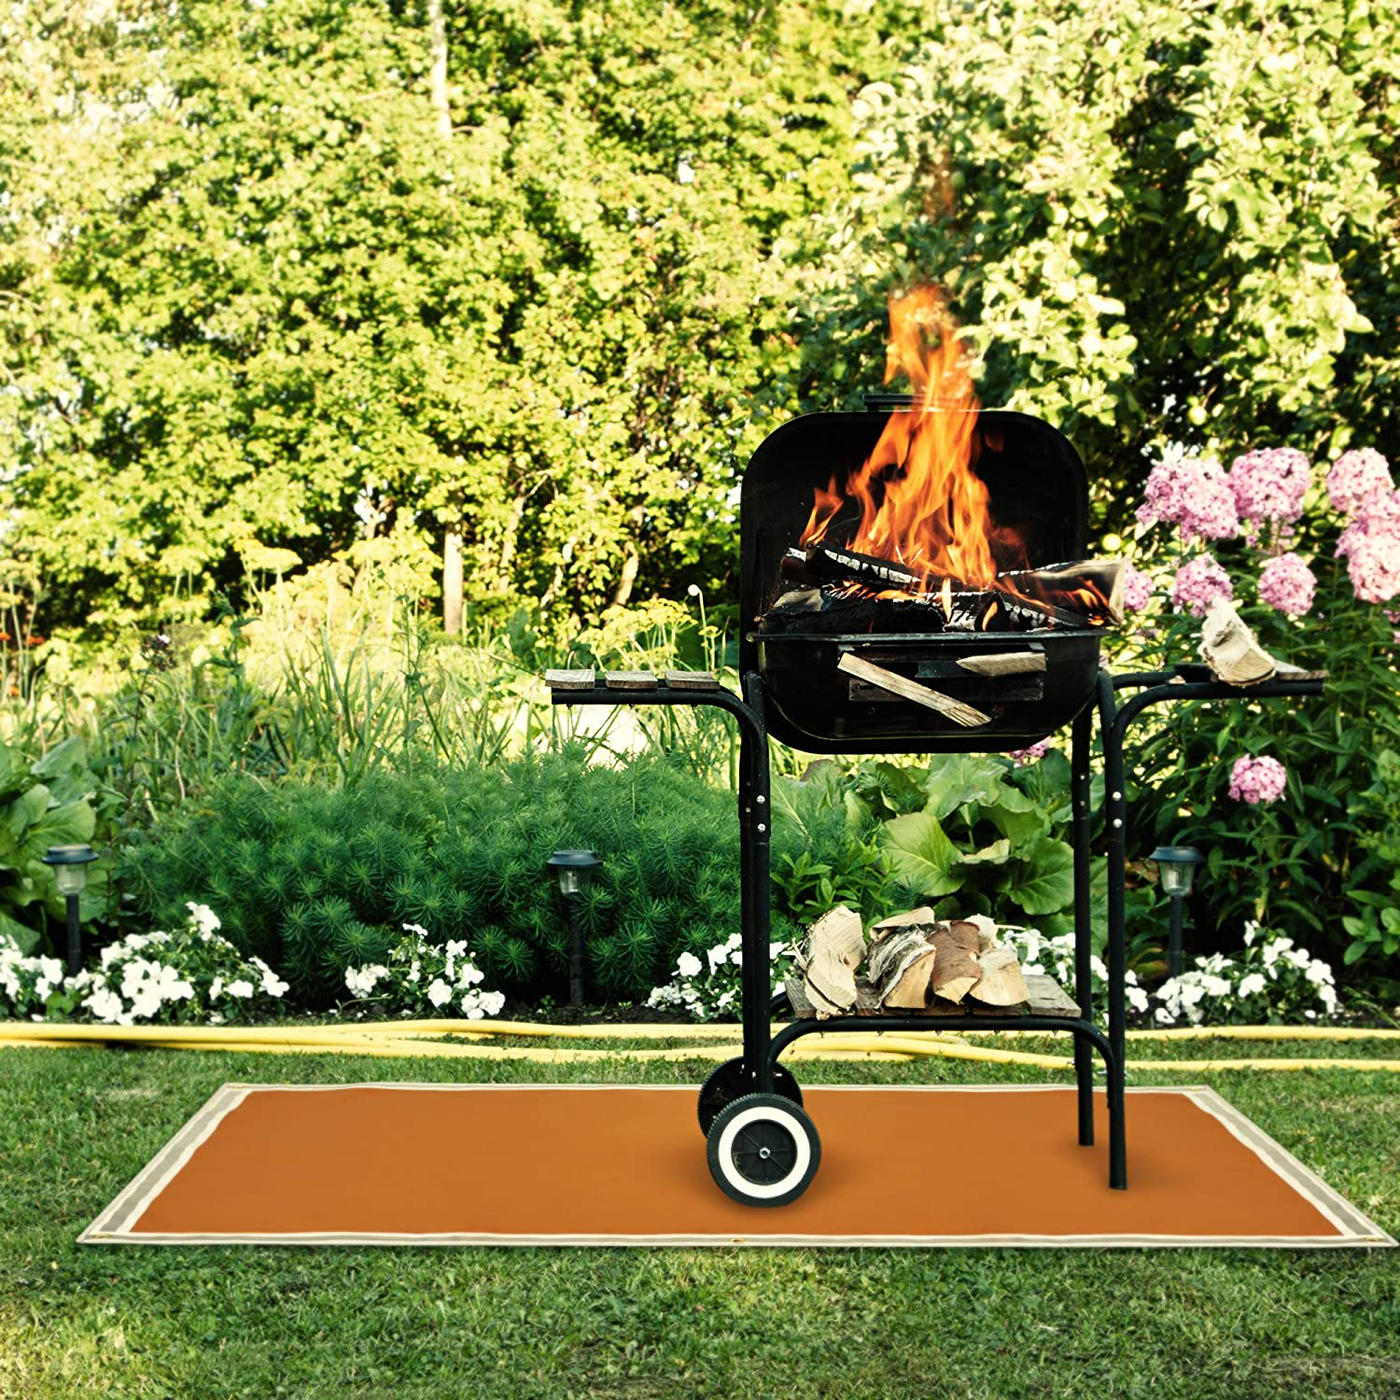 FIRE Pit MAT 61"x39"+ BBQ Gloves - Pad Patio Fireproof Protector Grass Deck Grill - Lawn Outdoor Gas Fire Pit Mats for Under Fire Pit Bottom Accessories Wood Decking Floor Camping -Ground Rugs Heat